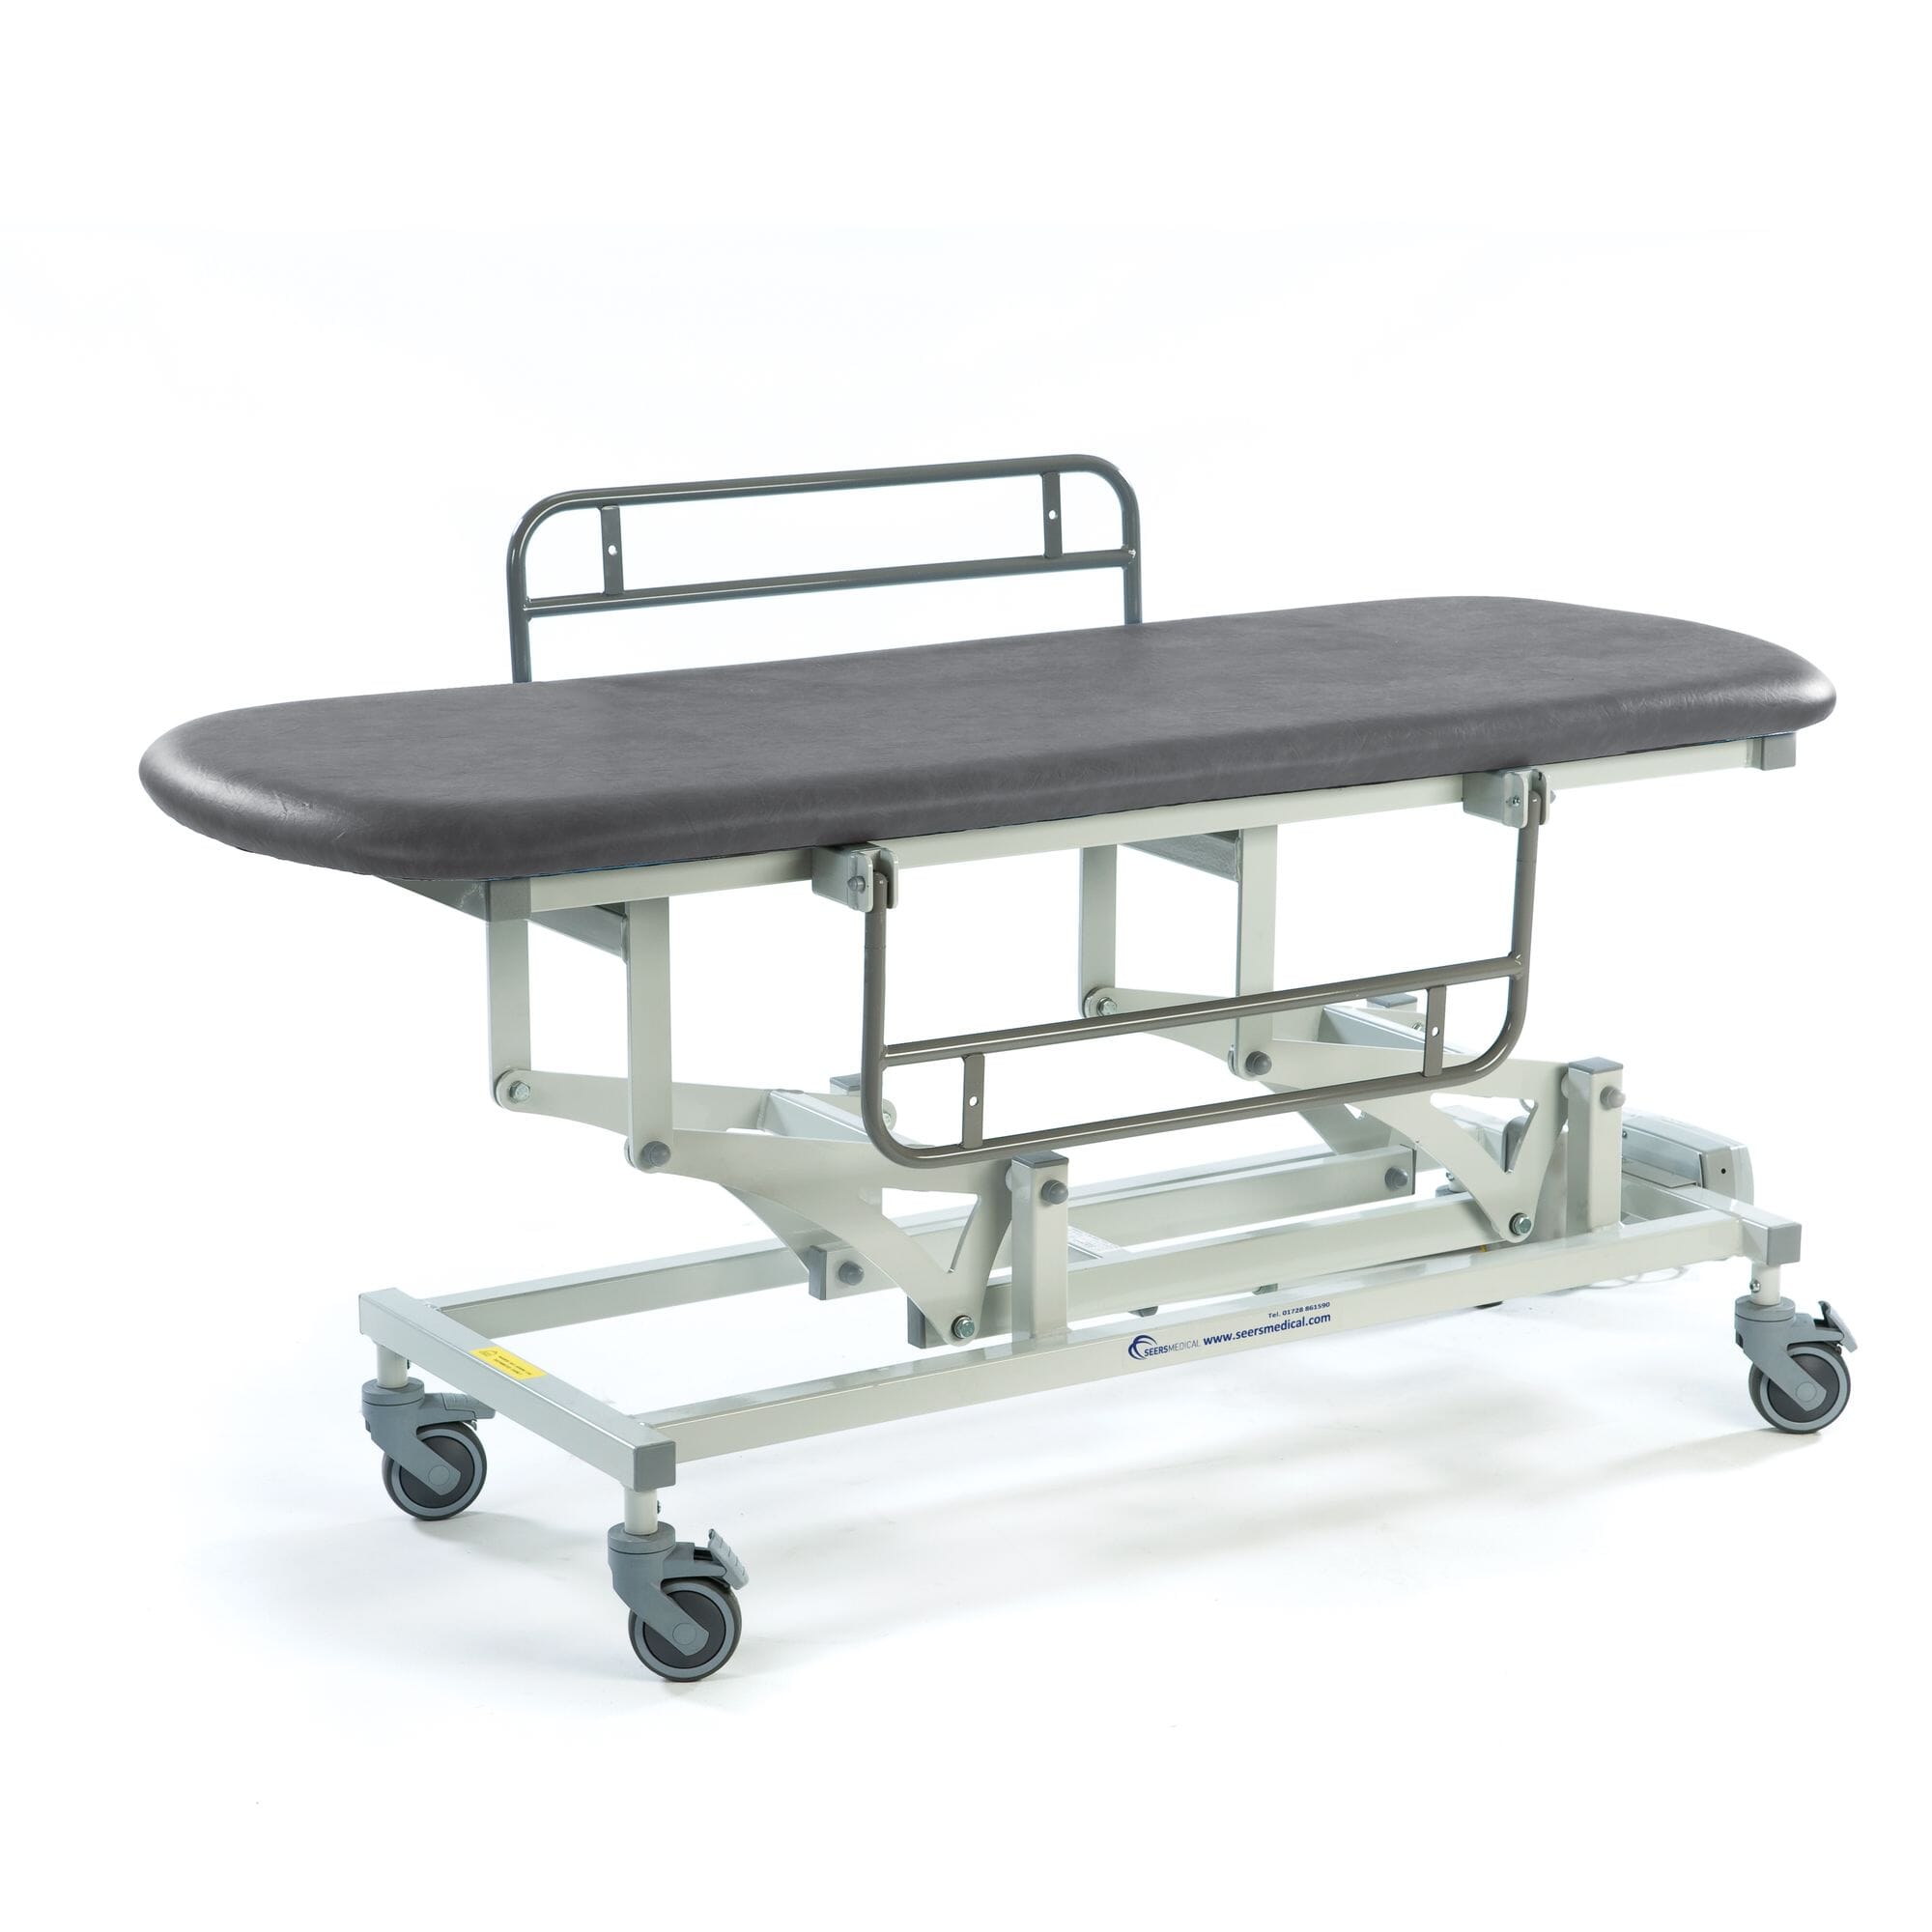 View Electric Sterling Changing Table Dark Grey 1520mm information